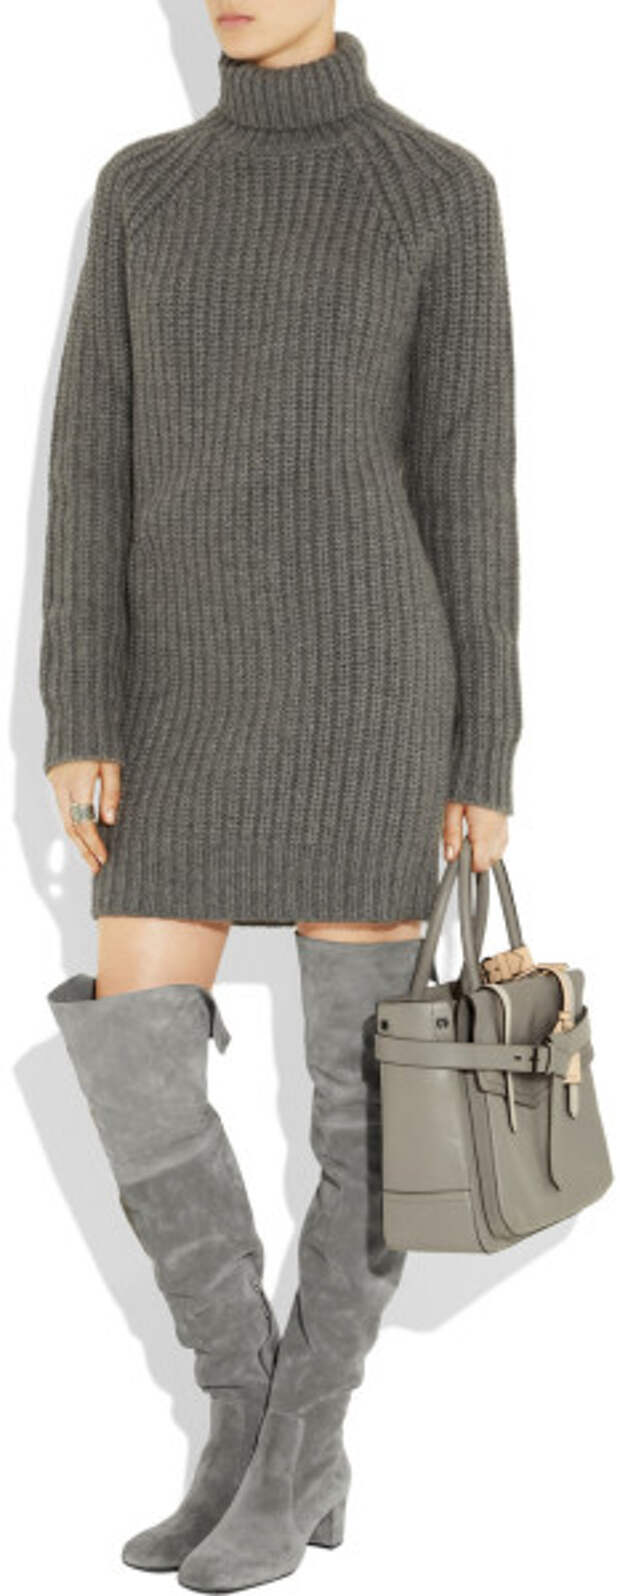 michael-kors-gray-suede-over-the-knee-boots-product-2-1903164-168231813_large_flex.jpeg